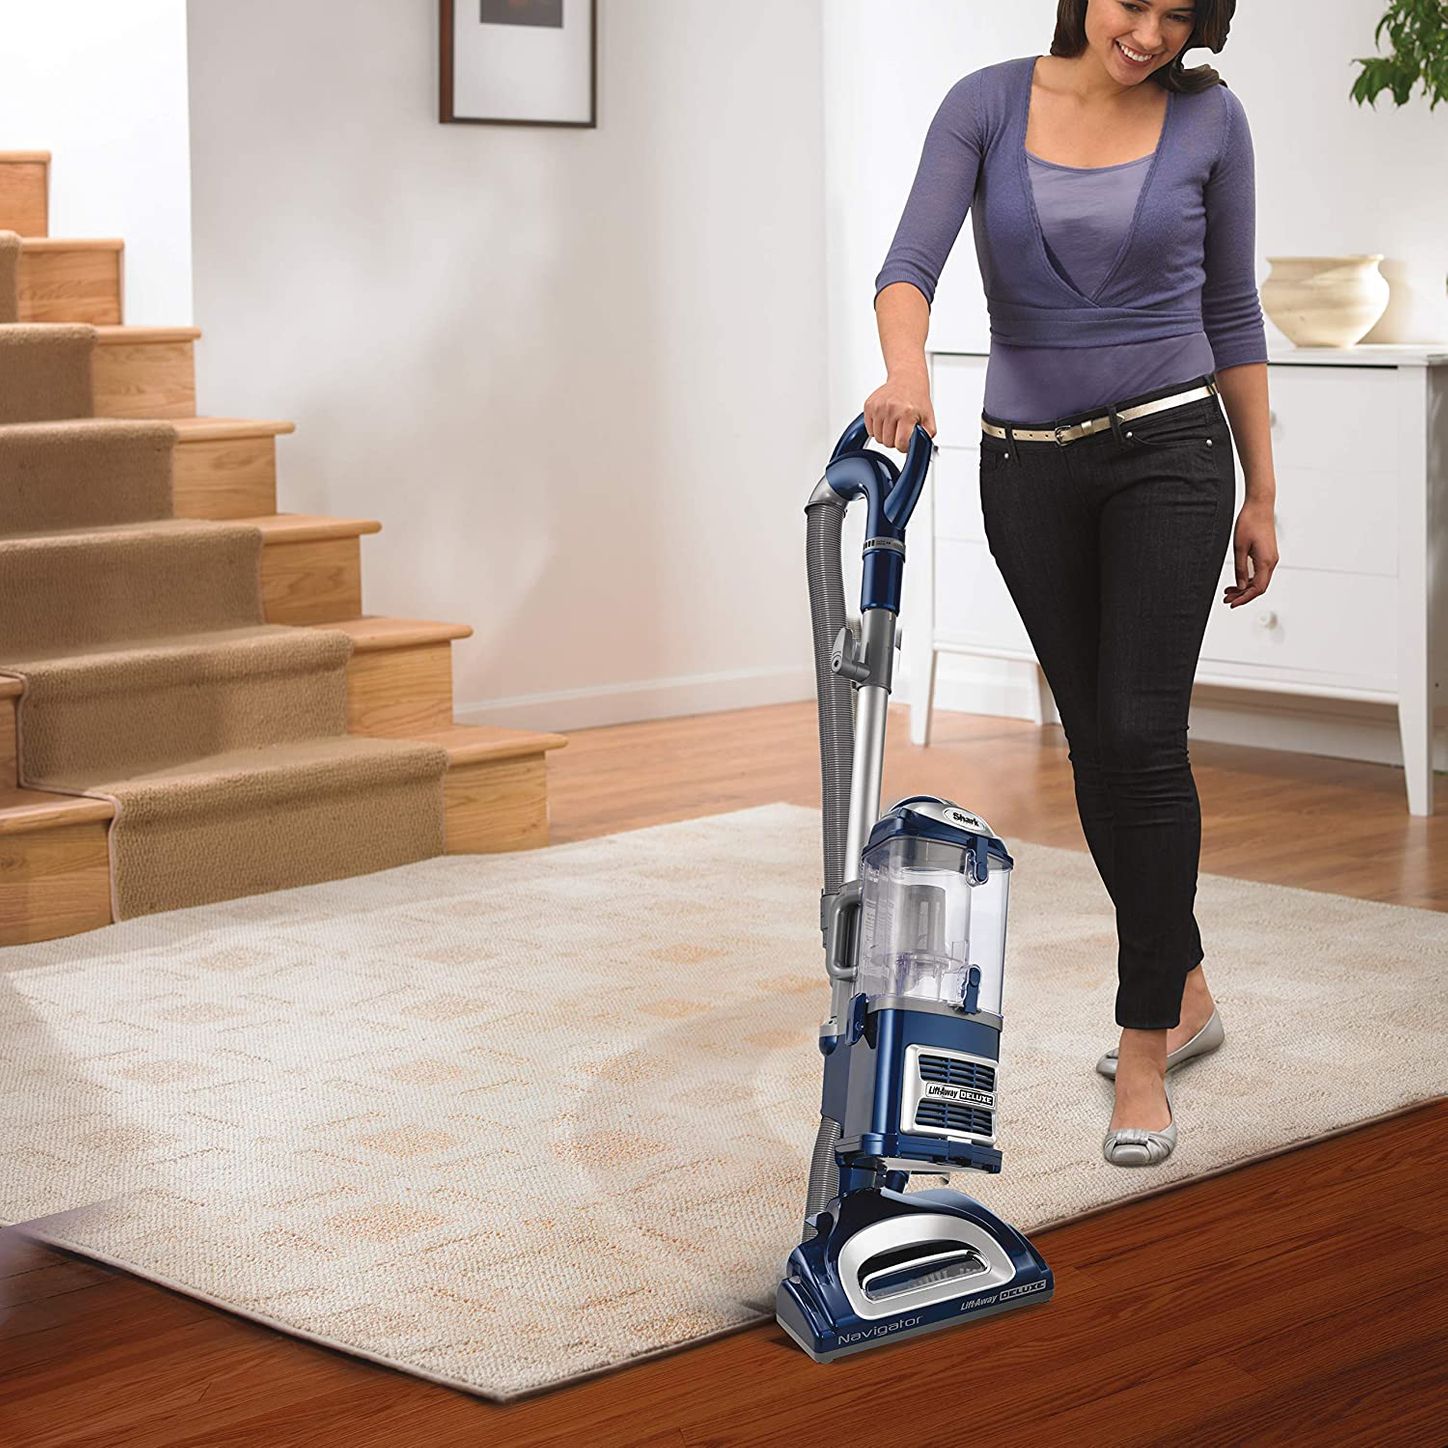 18 Best Vacuum Cleaners 2021 The, Best Vacuum Cleaner For Tile And Hardwood Floors